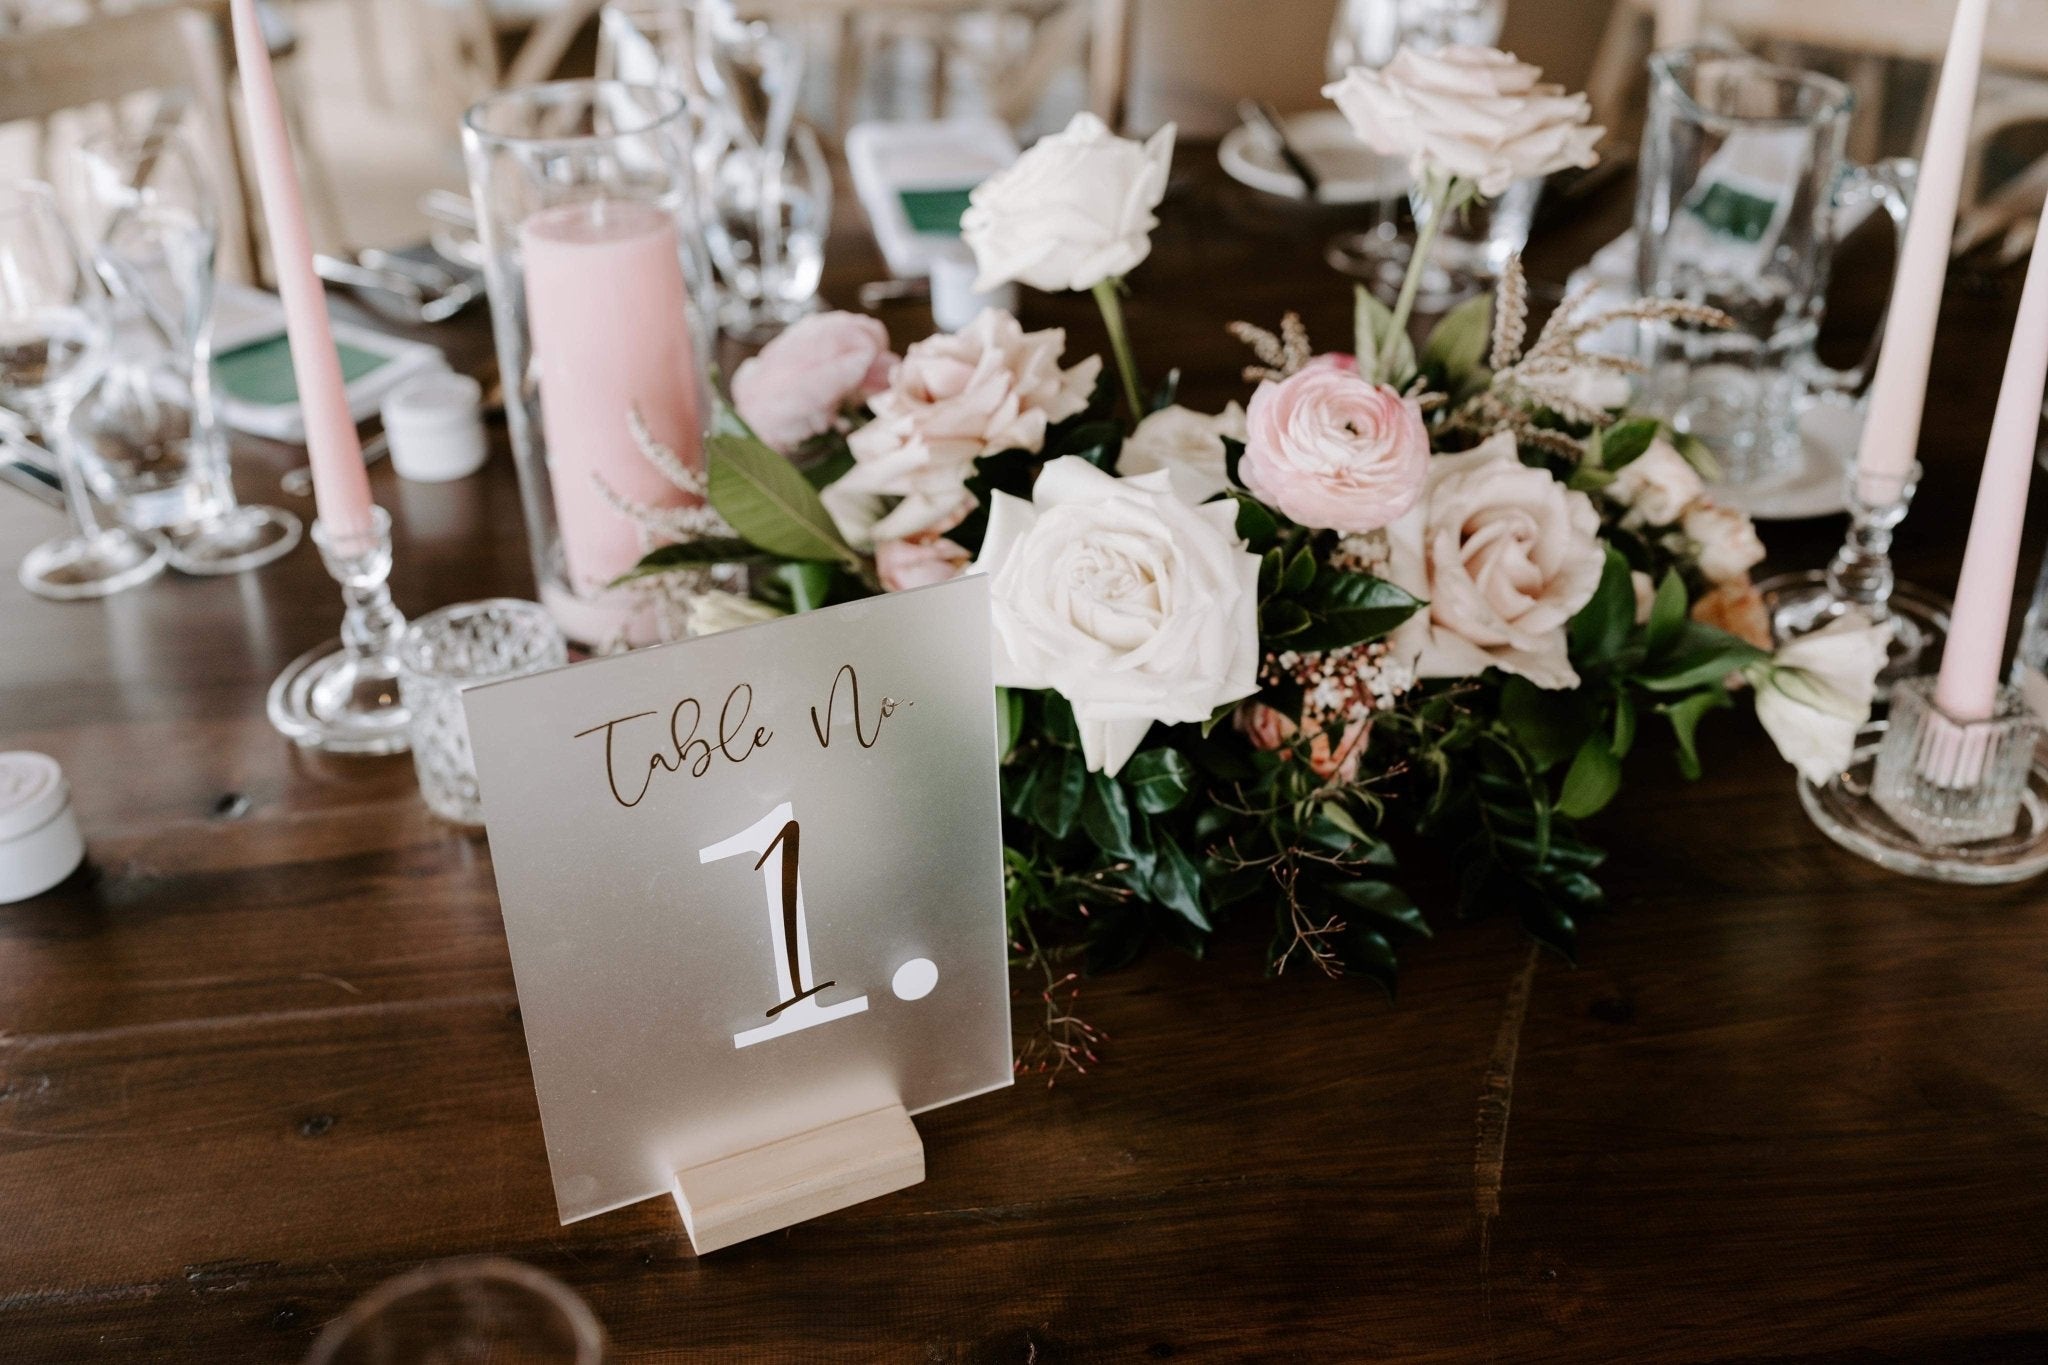 Frosted Acrylic Table Numbers - The Humble Gift Co.